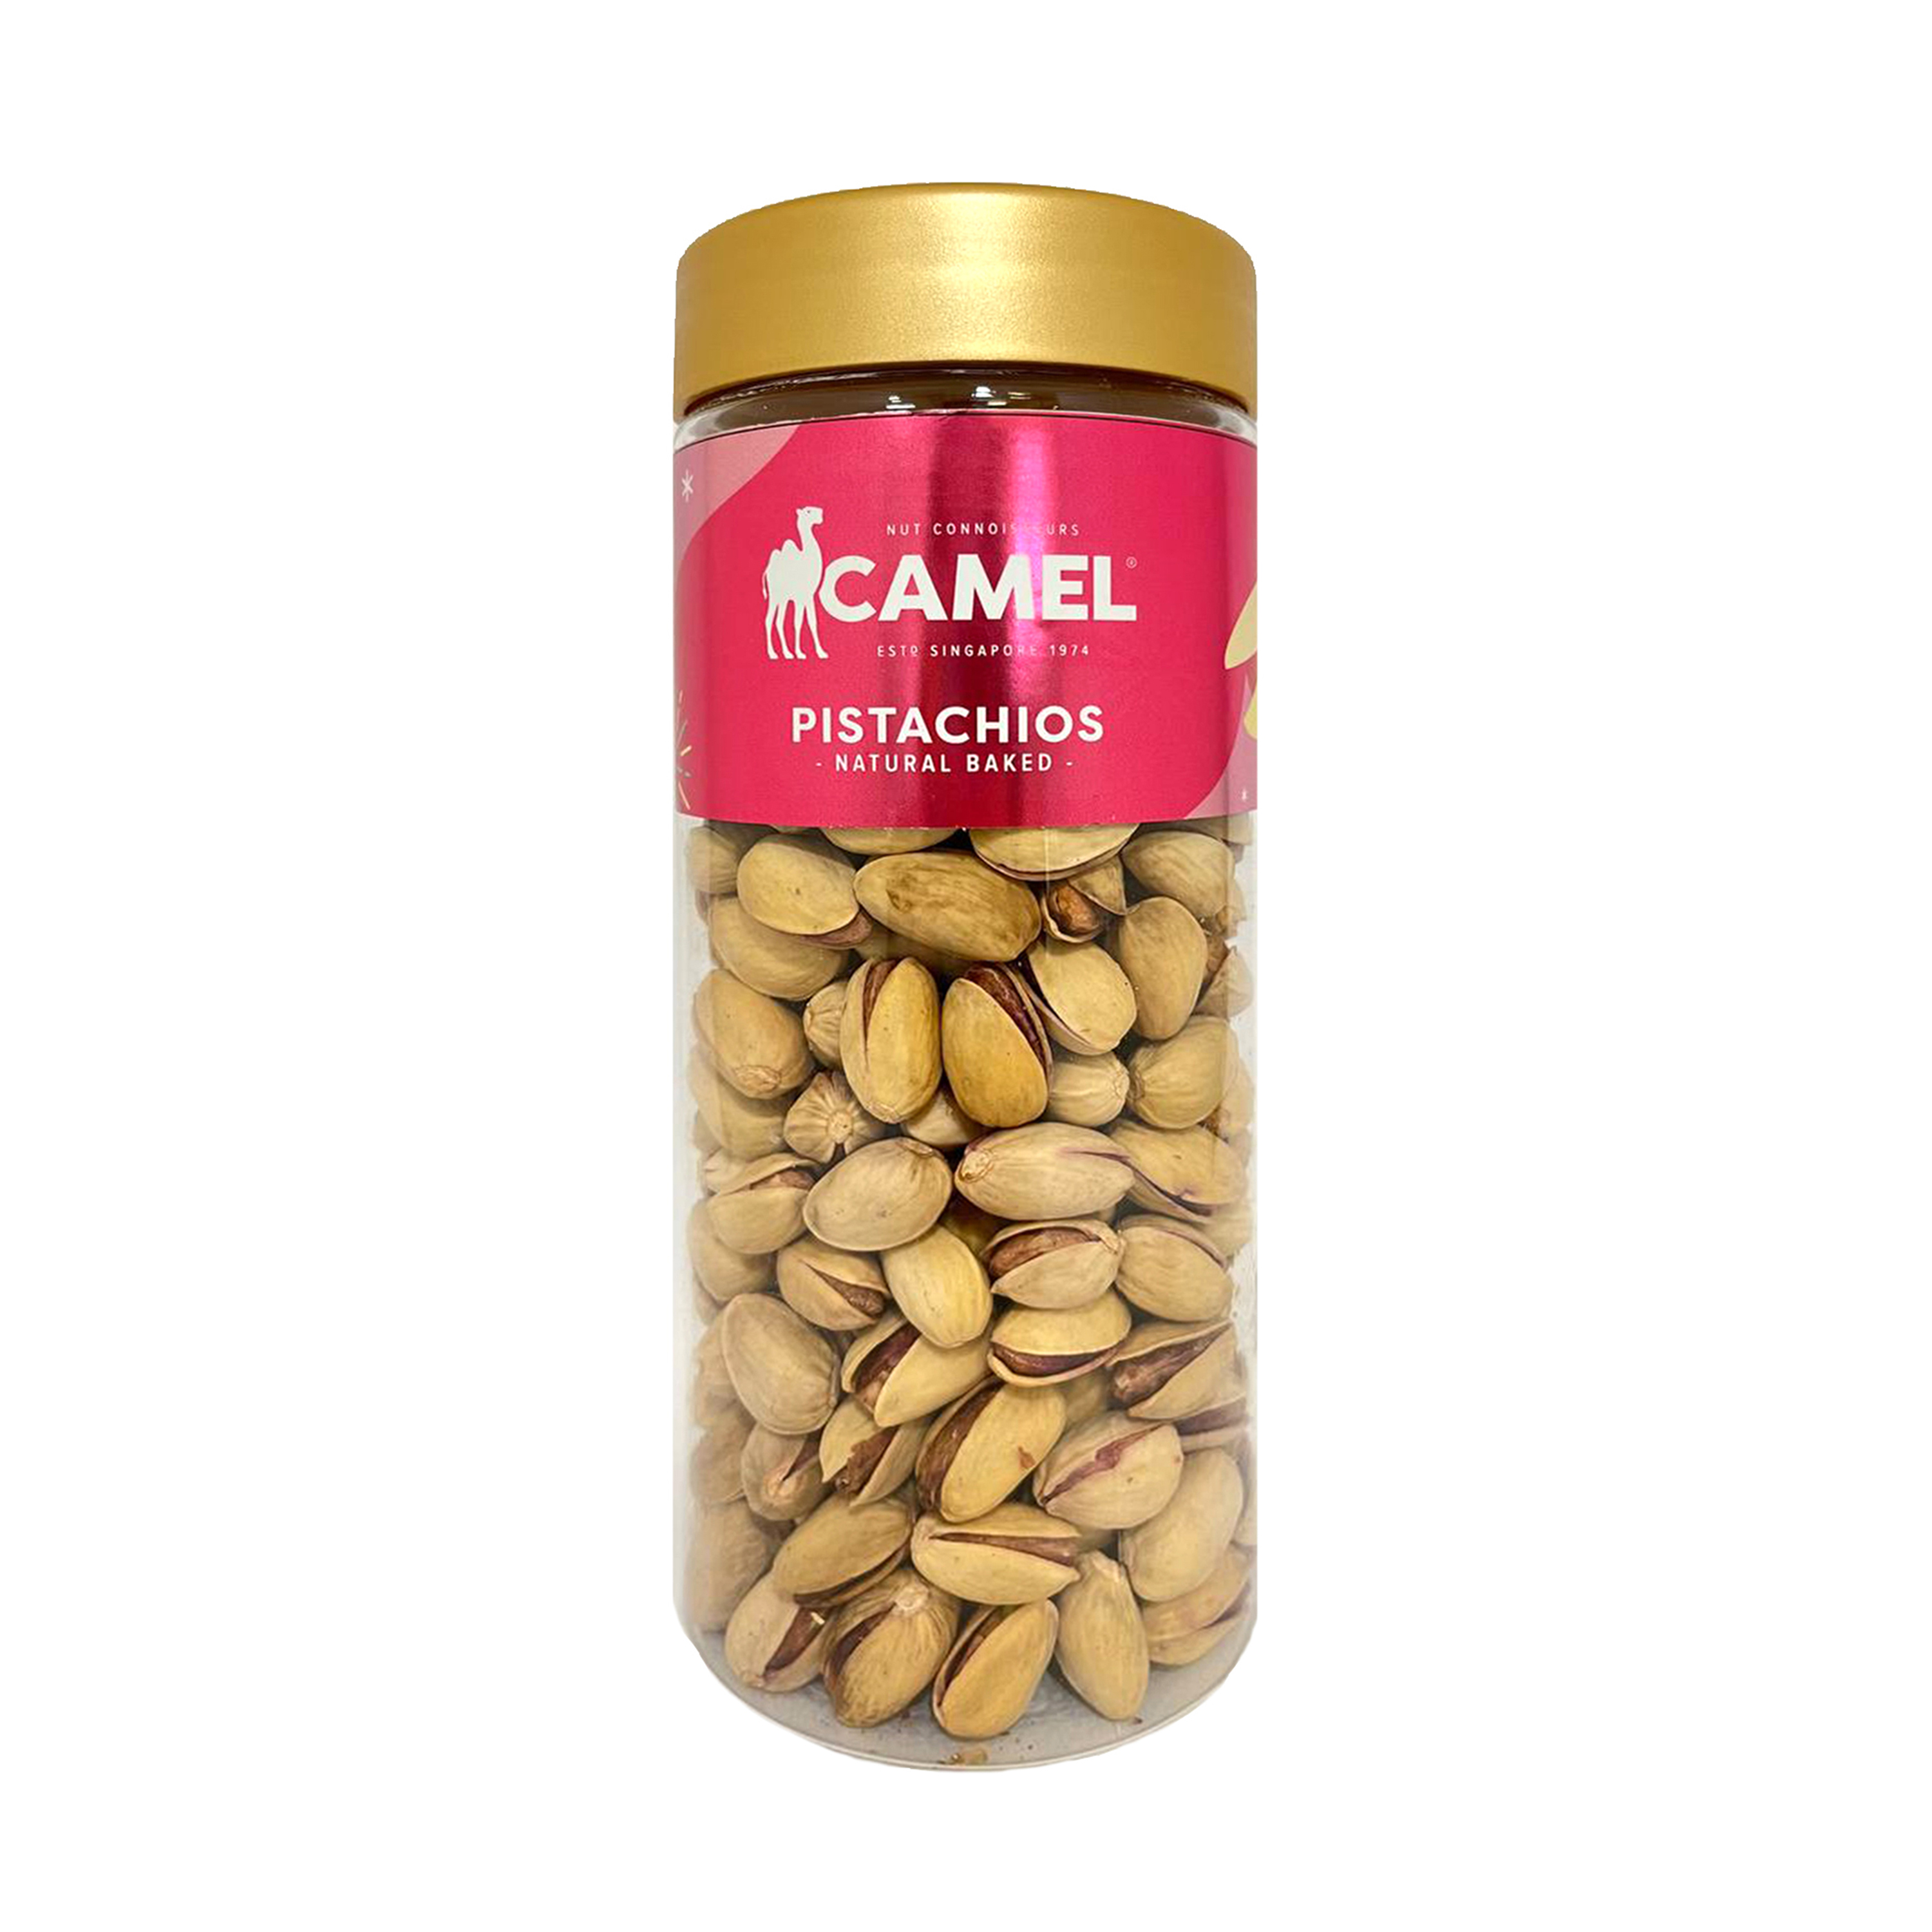 Natural Baked Pistachios Festive Container